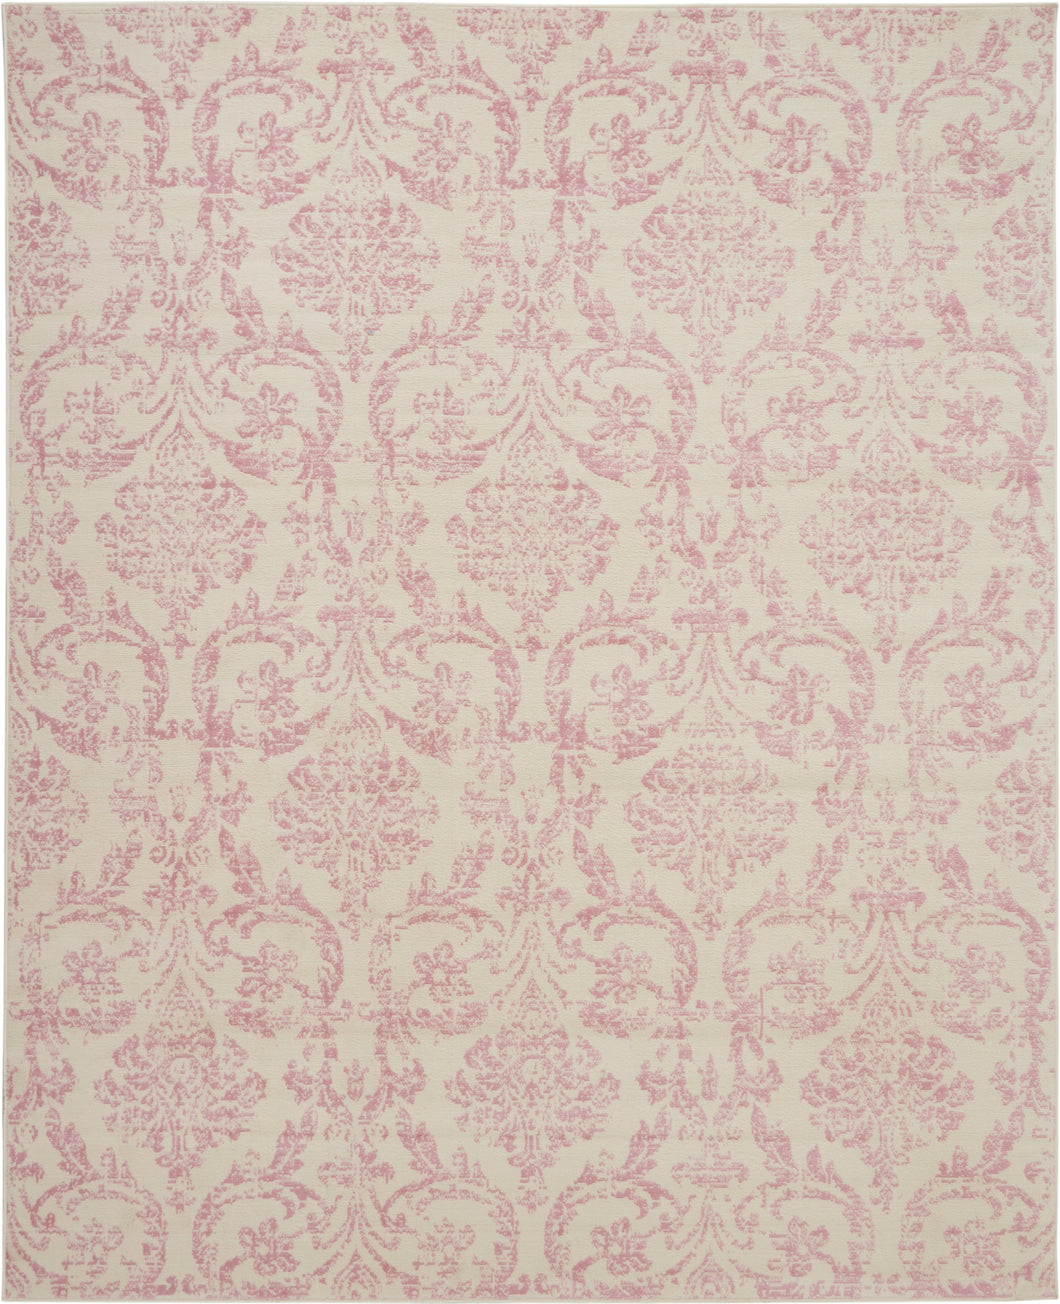 Nourison Jubilant 9'x12' White and Pink Area Rug JUB09 Ivory/Pink